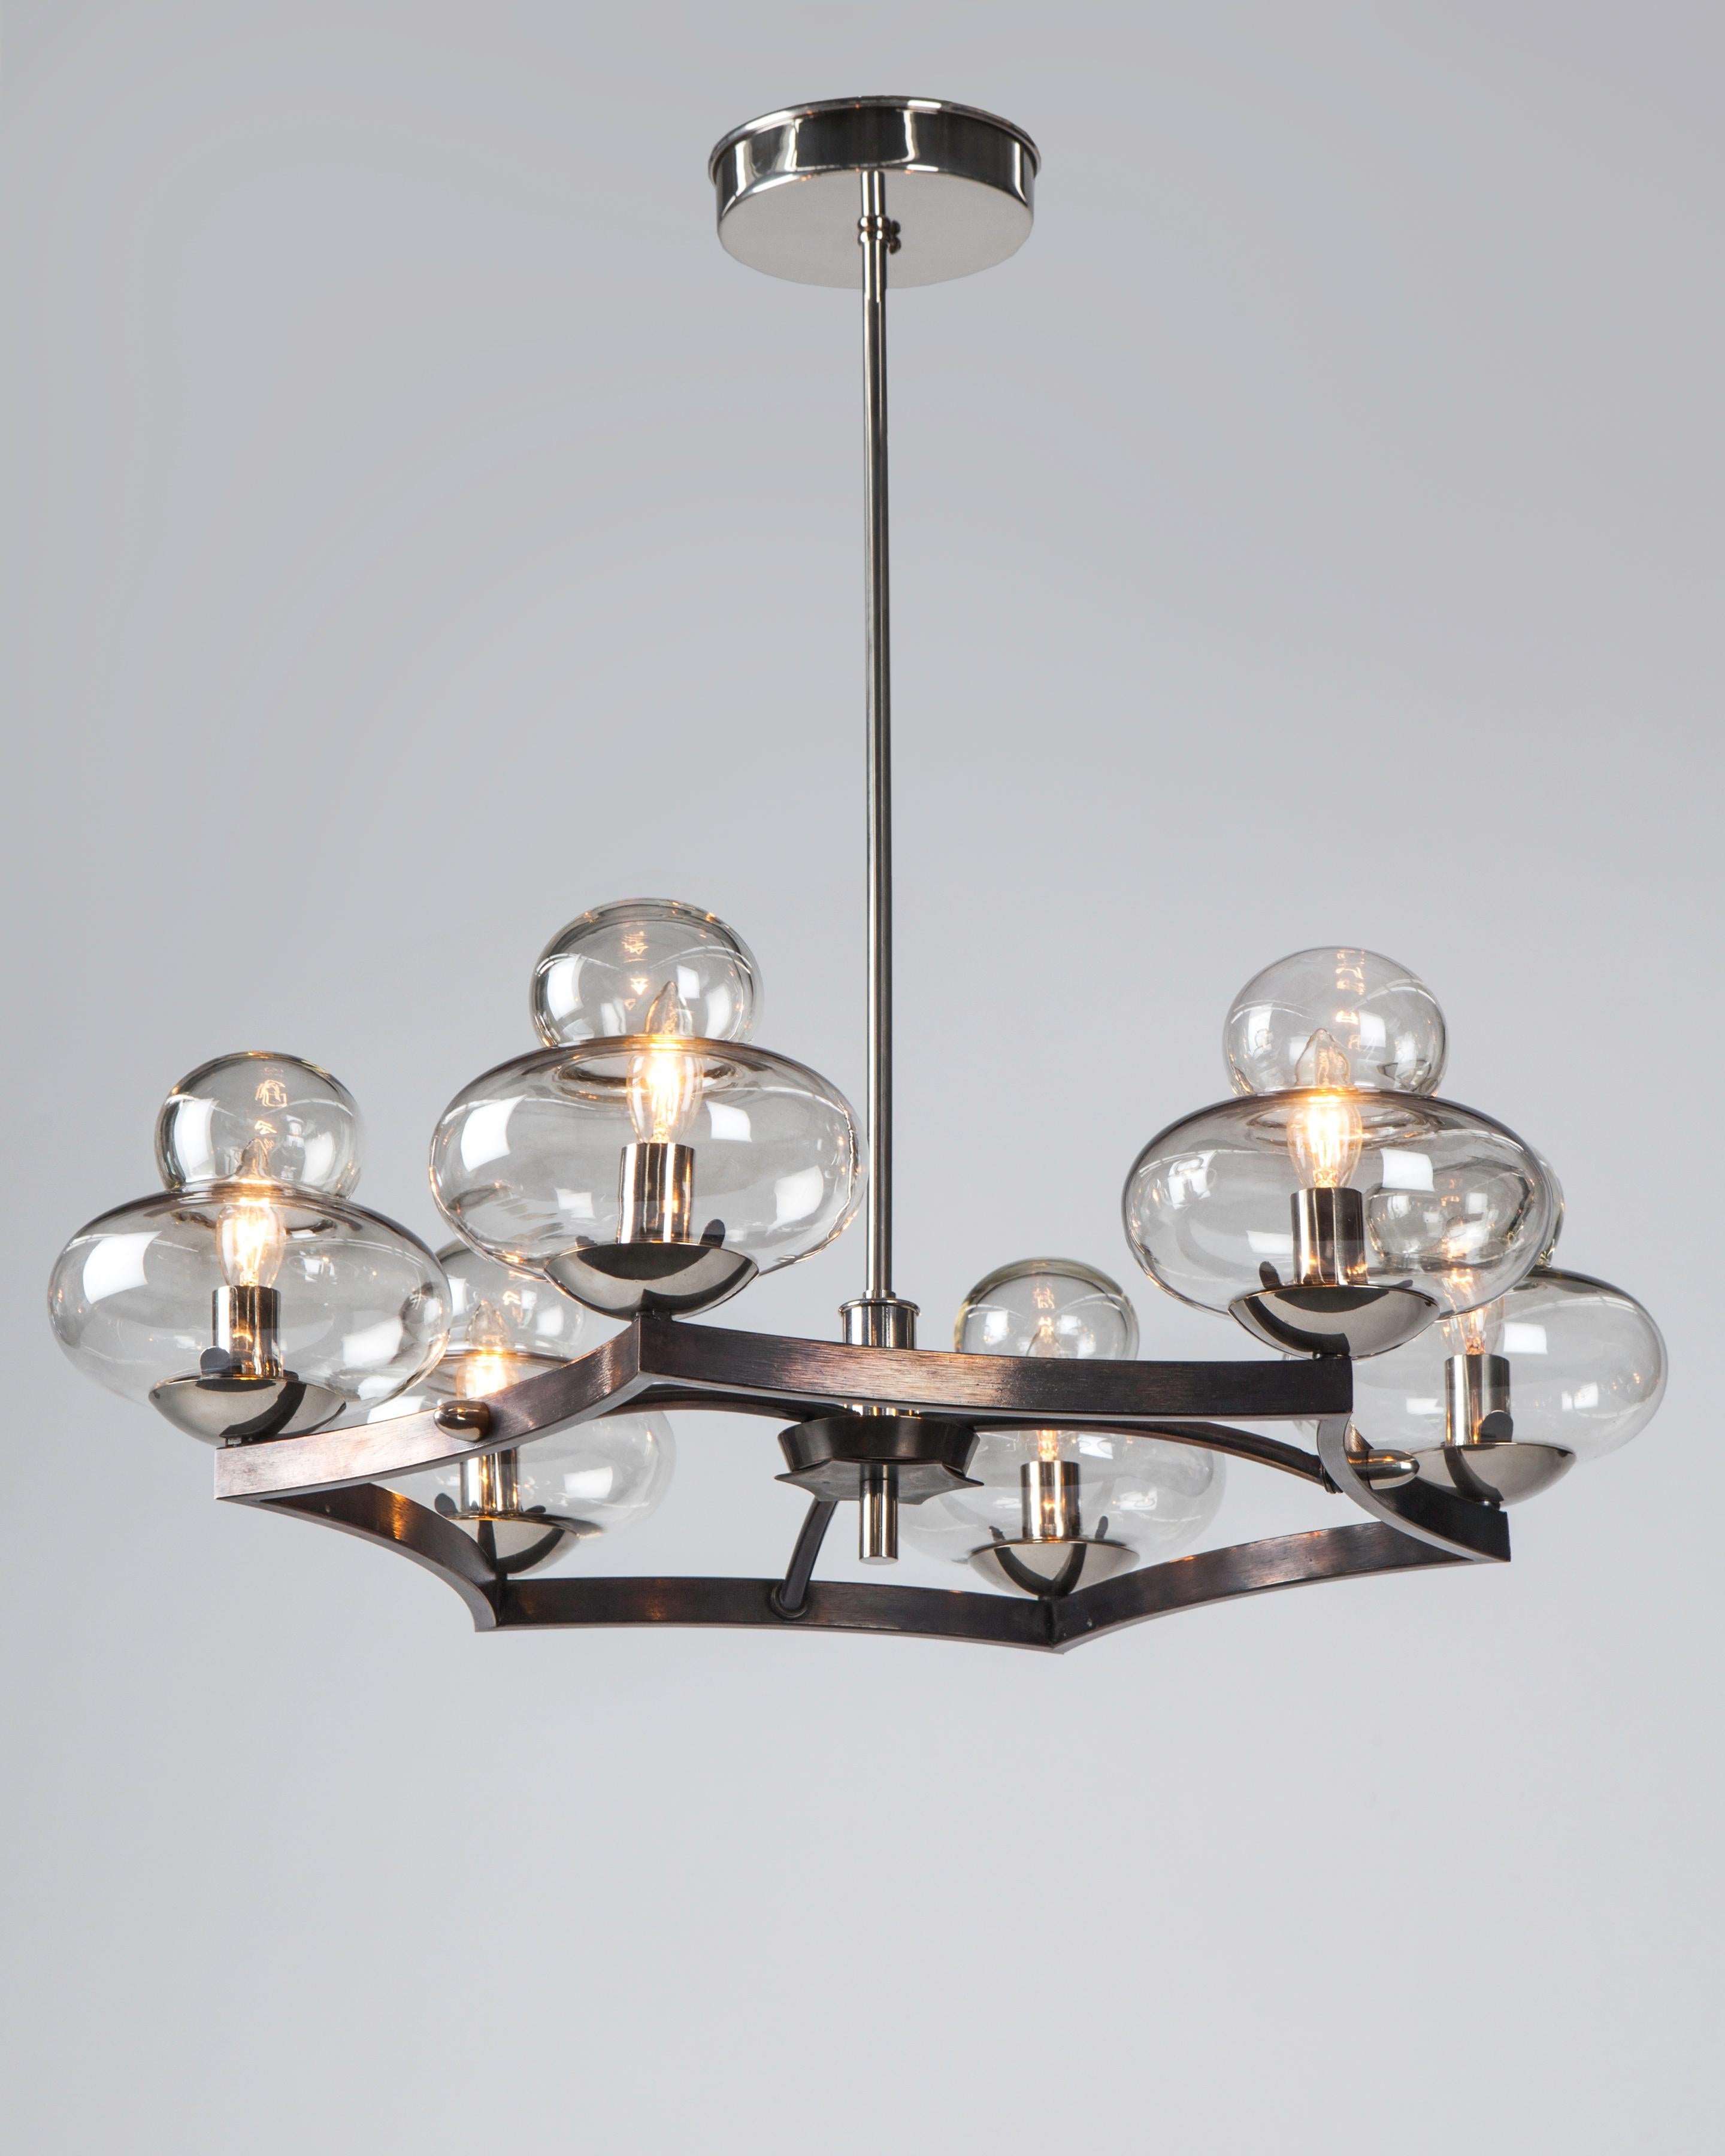 AHL4139

A six light vintage chandelier with clear glass shades arrayed at the points of a blackened metal star body. Suspended from polished nickel fittings. Circa 1950s. Due to the antique nature of this fixture, there may be some nicks or